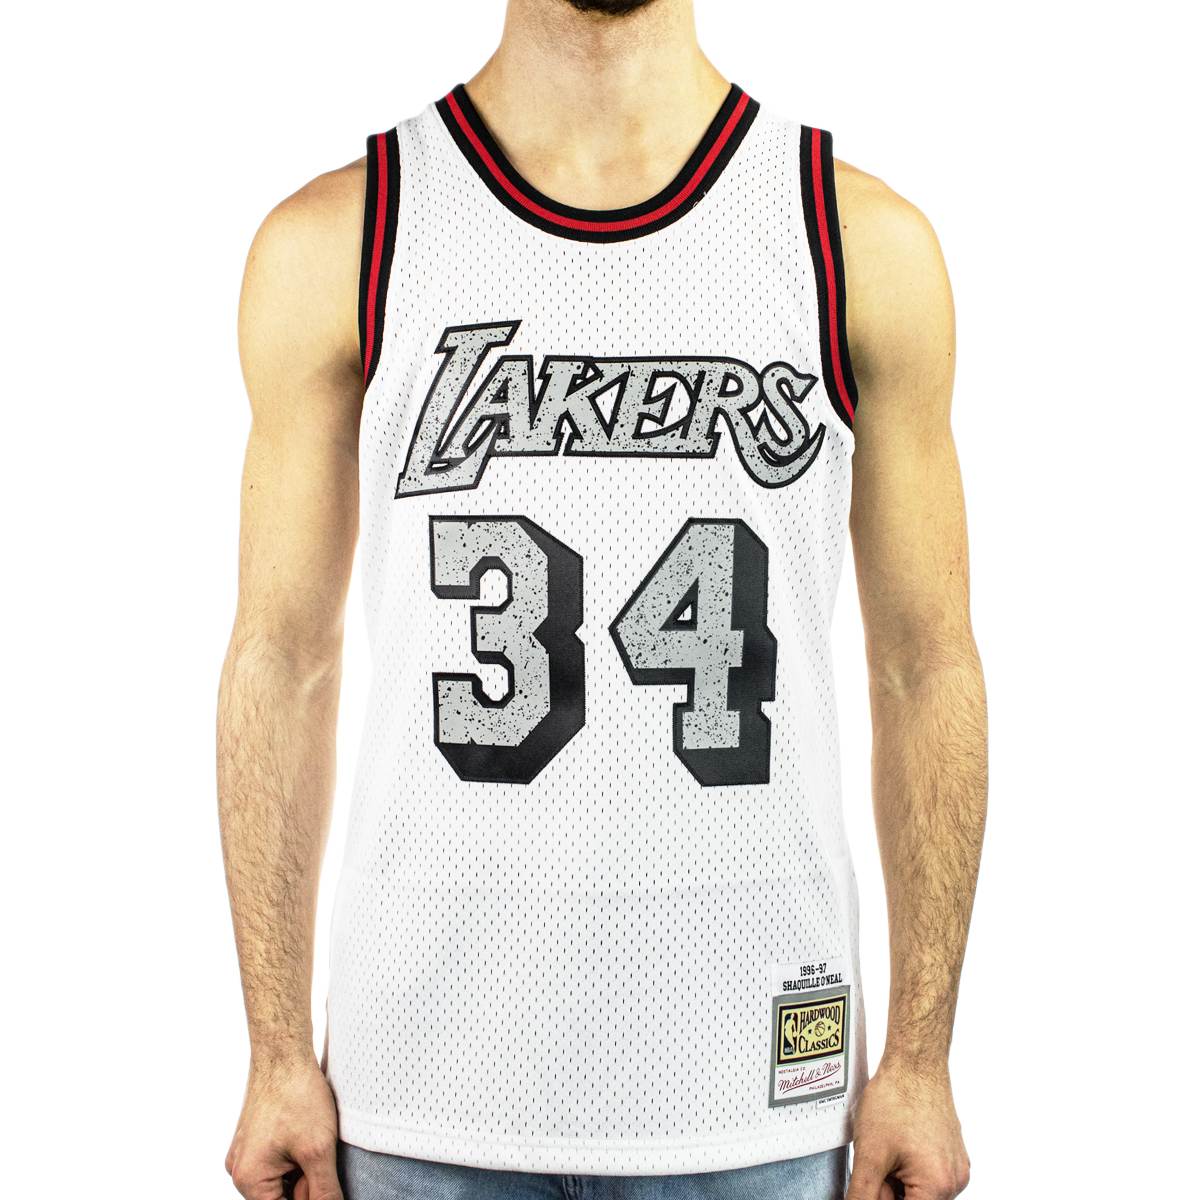 Mitchell & Ness Los Angeles Lakers NBA Shaquille O'Neal 1996 Cracked Cement Swingman Jersey TFSM5934-LAL96SONWHIT-